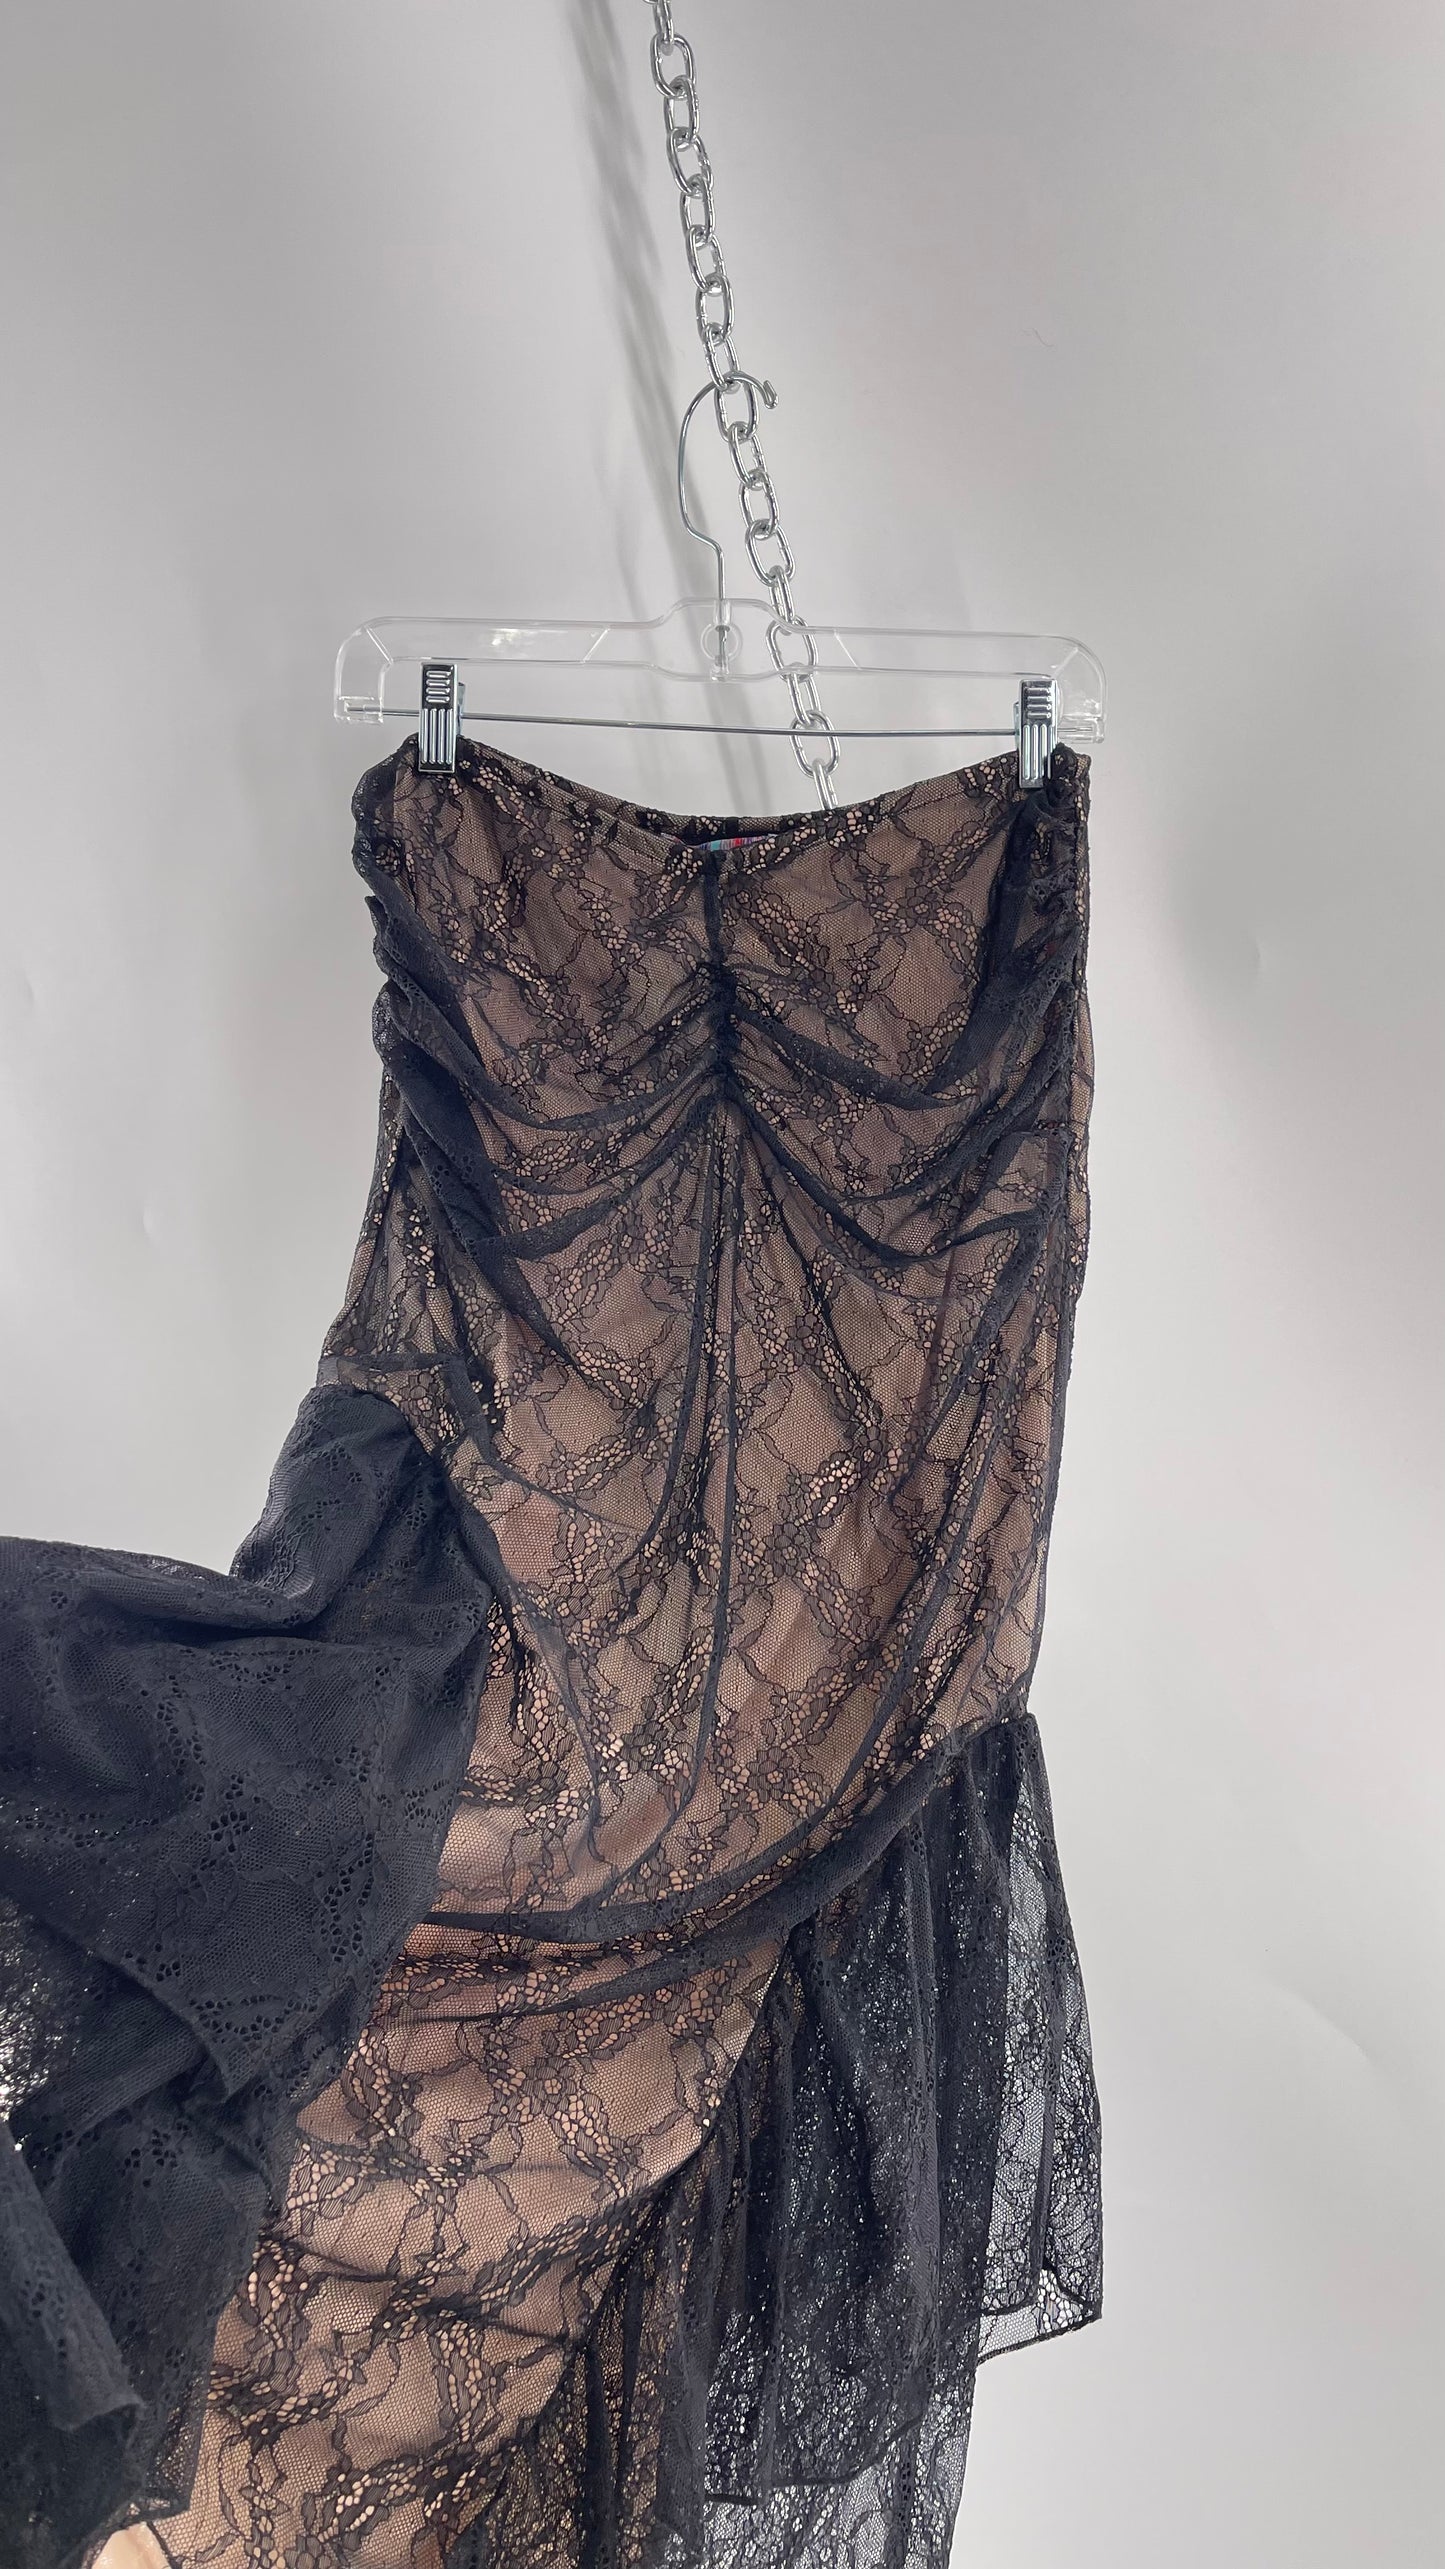 Urban Outfitters Black Lace Midi Skirt with Nude Underlay (Medium)